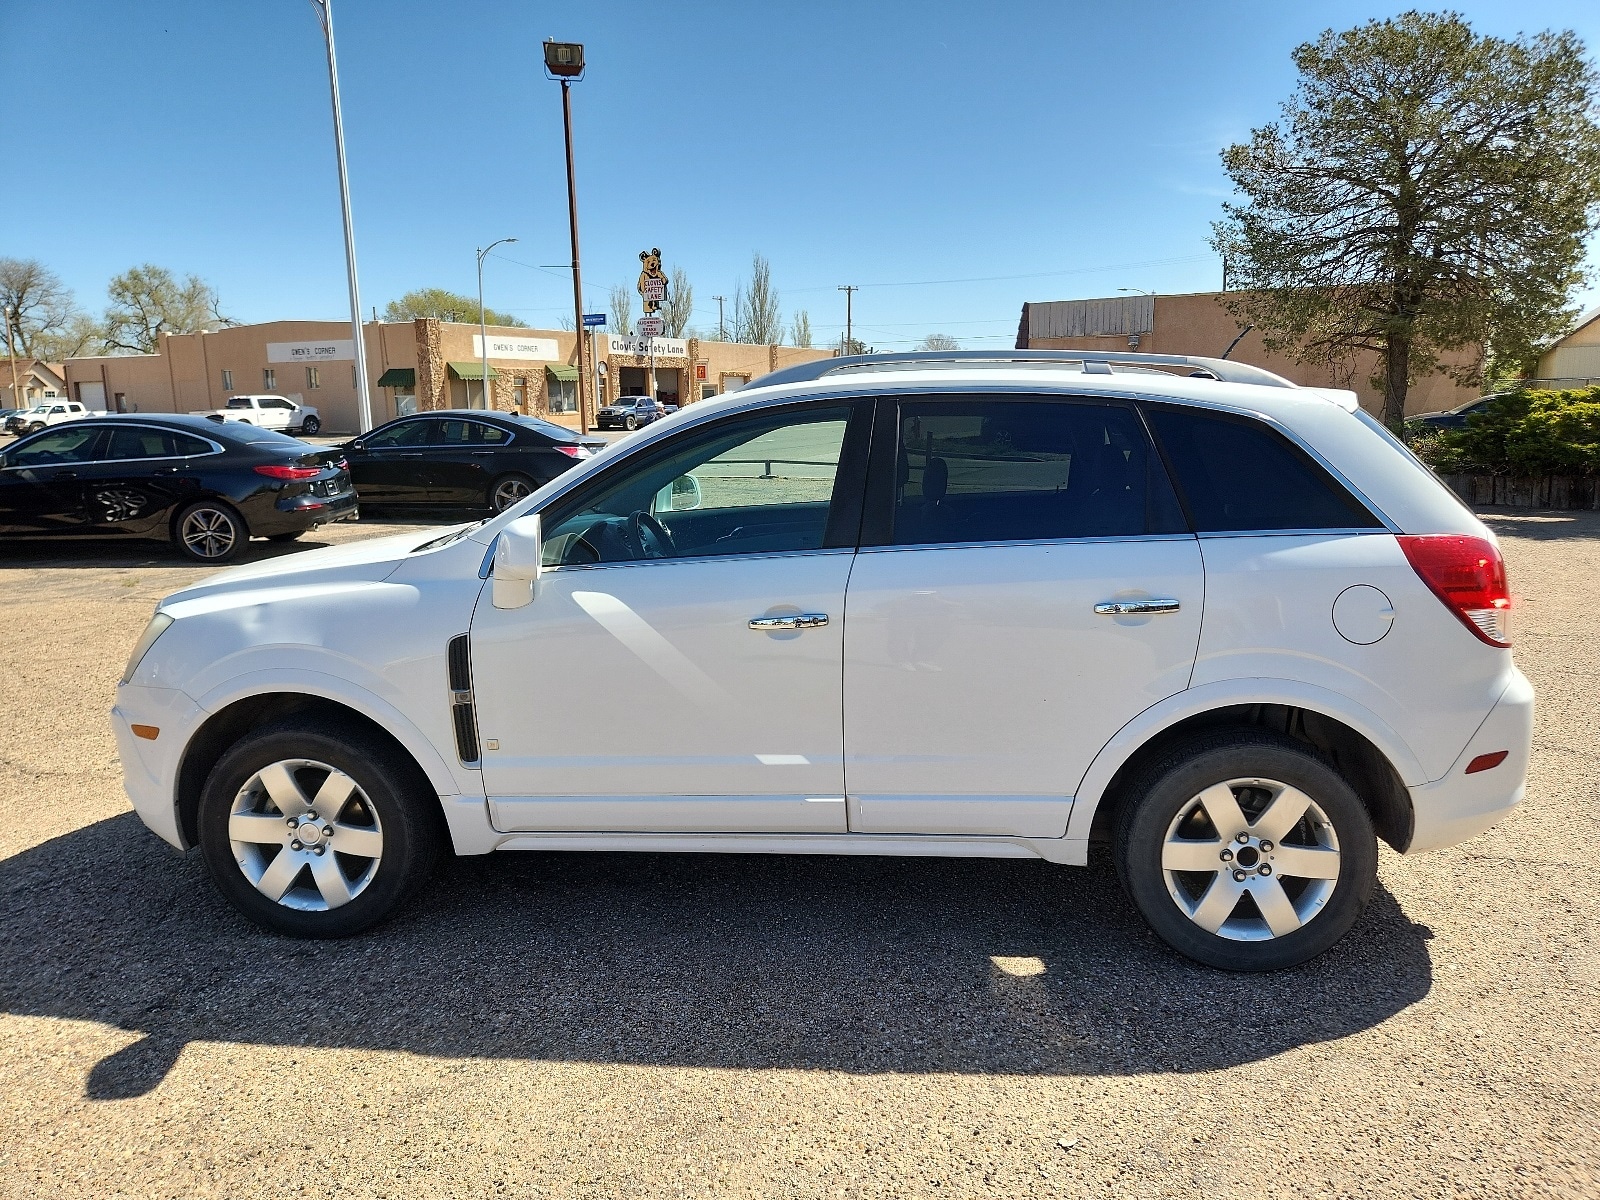 Used 2008 Saturn VUE XR with VIN 3GSCL537X8S537901 for sale in Portales, NM